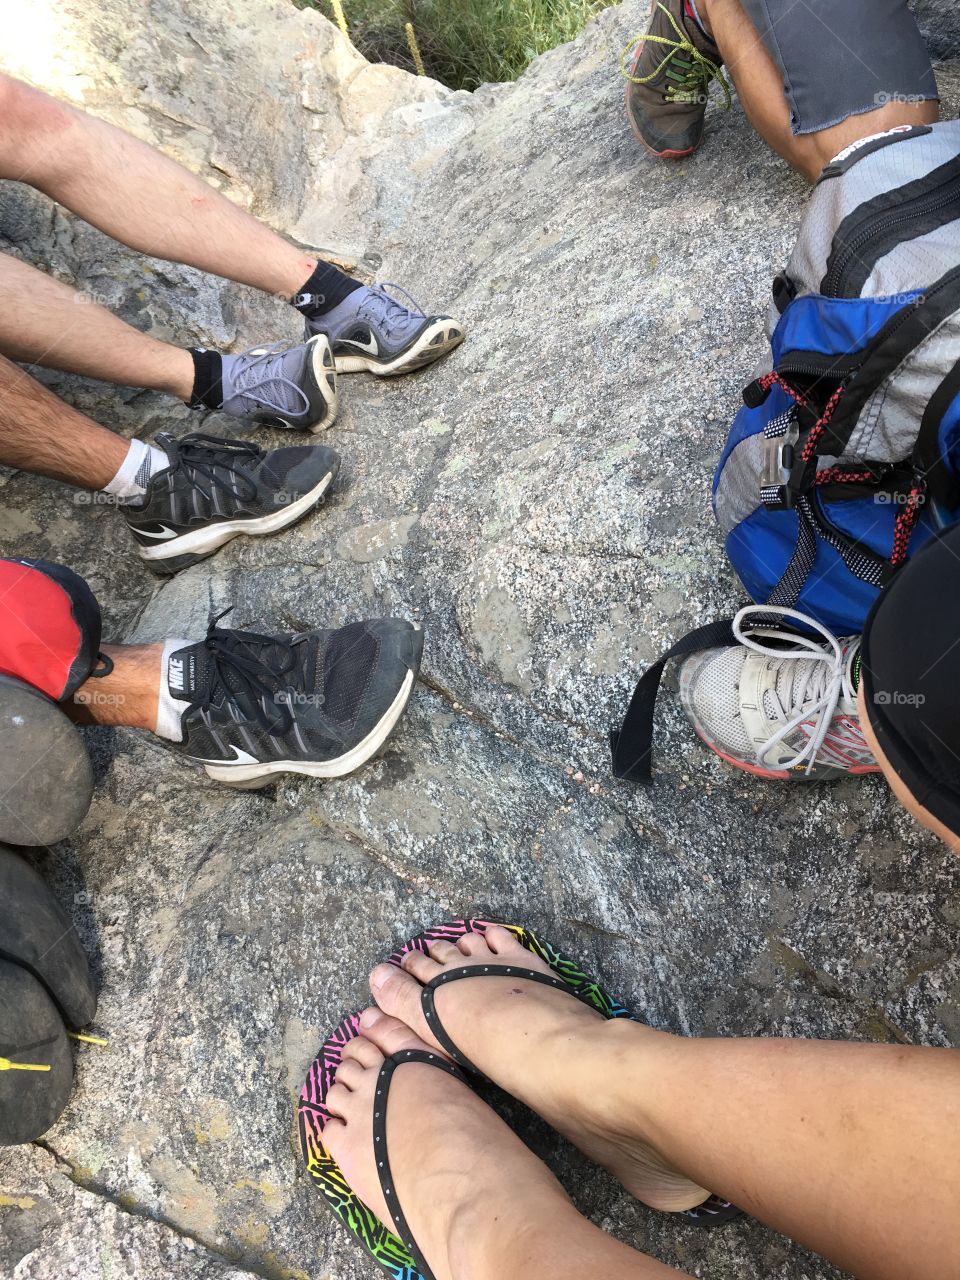 Colorful shoes of a group of friends after a day of climbing